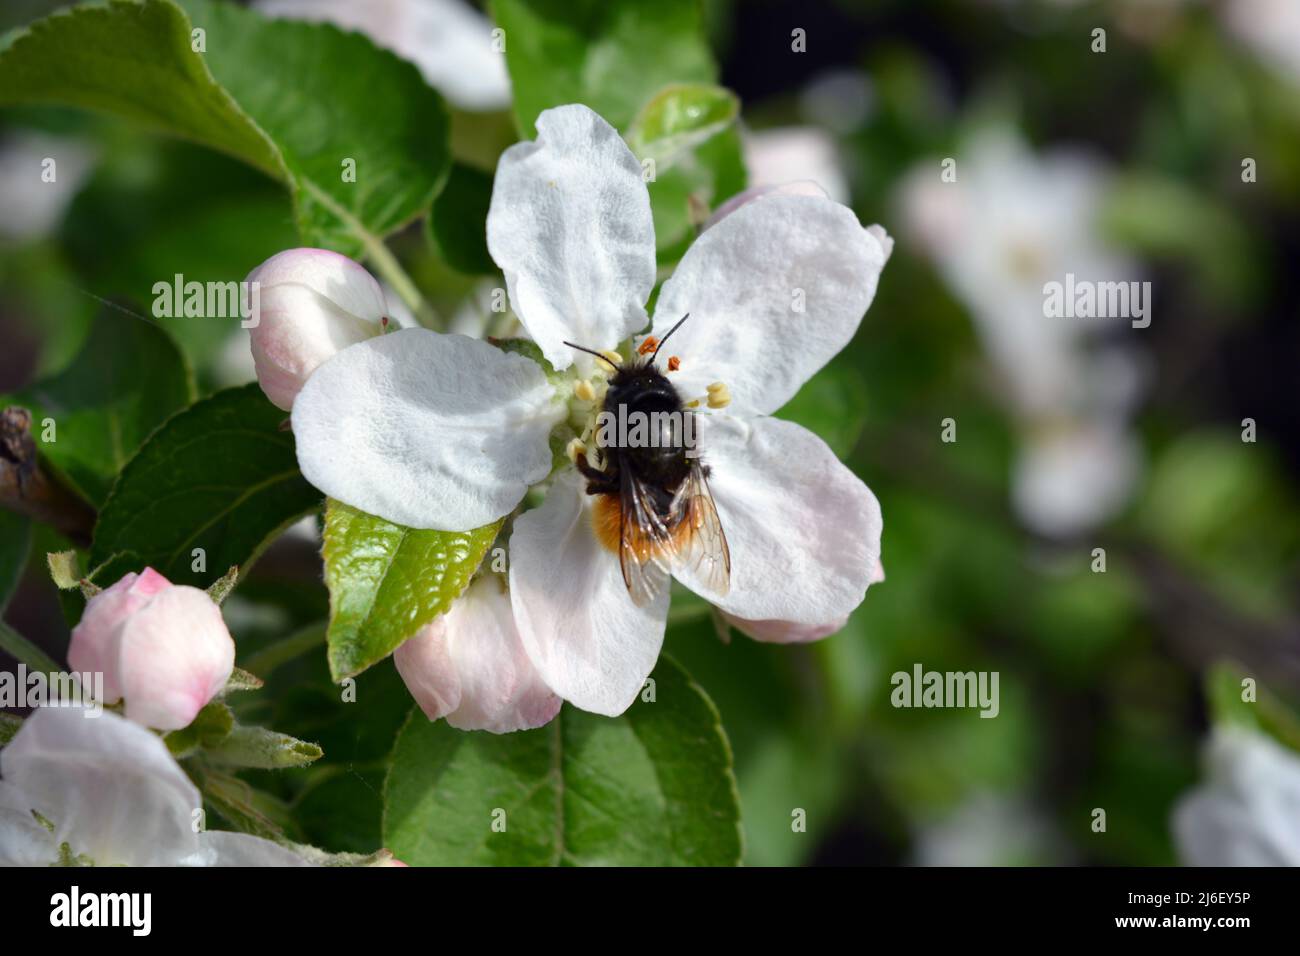 Beautiful large white buds of a blooming apple tree with a large black and yellow beetle, illuminated by the bright rays of the sun. Stock Photo